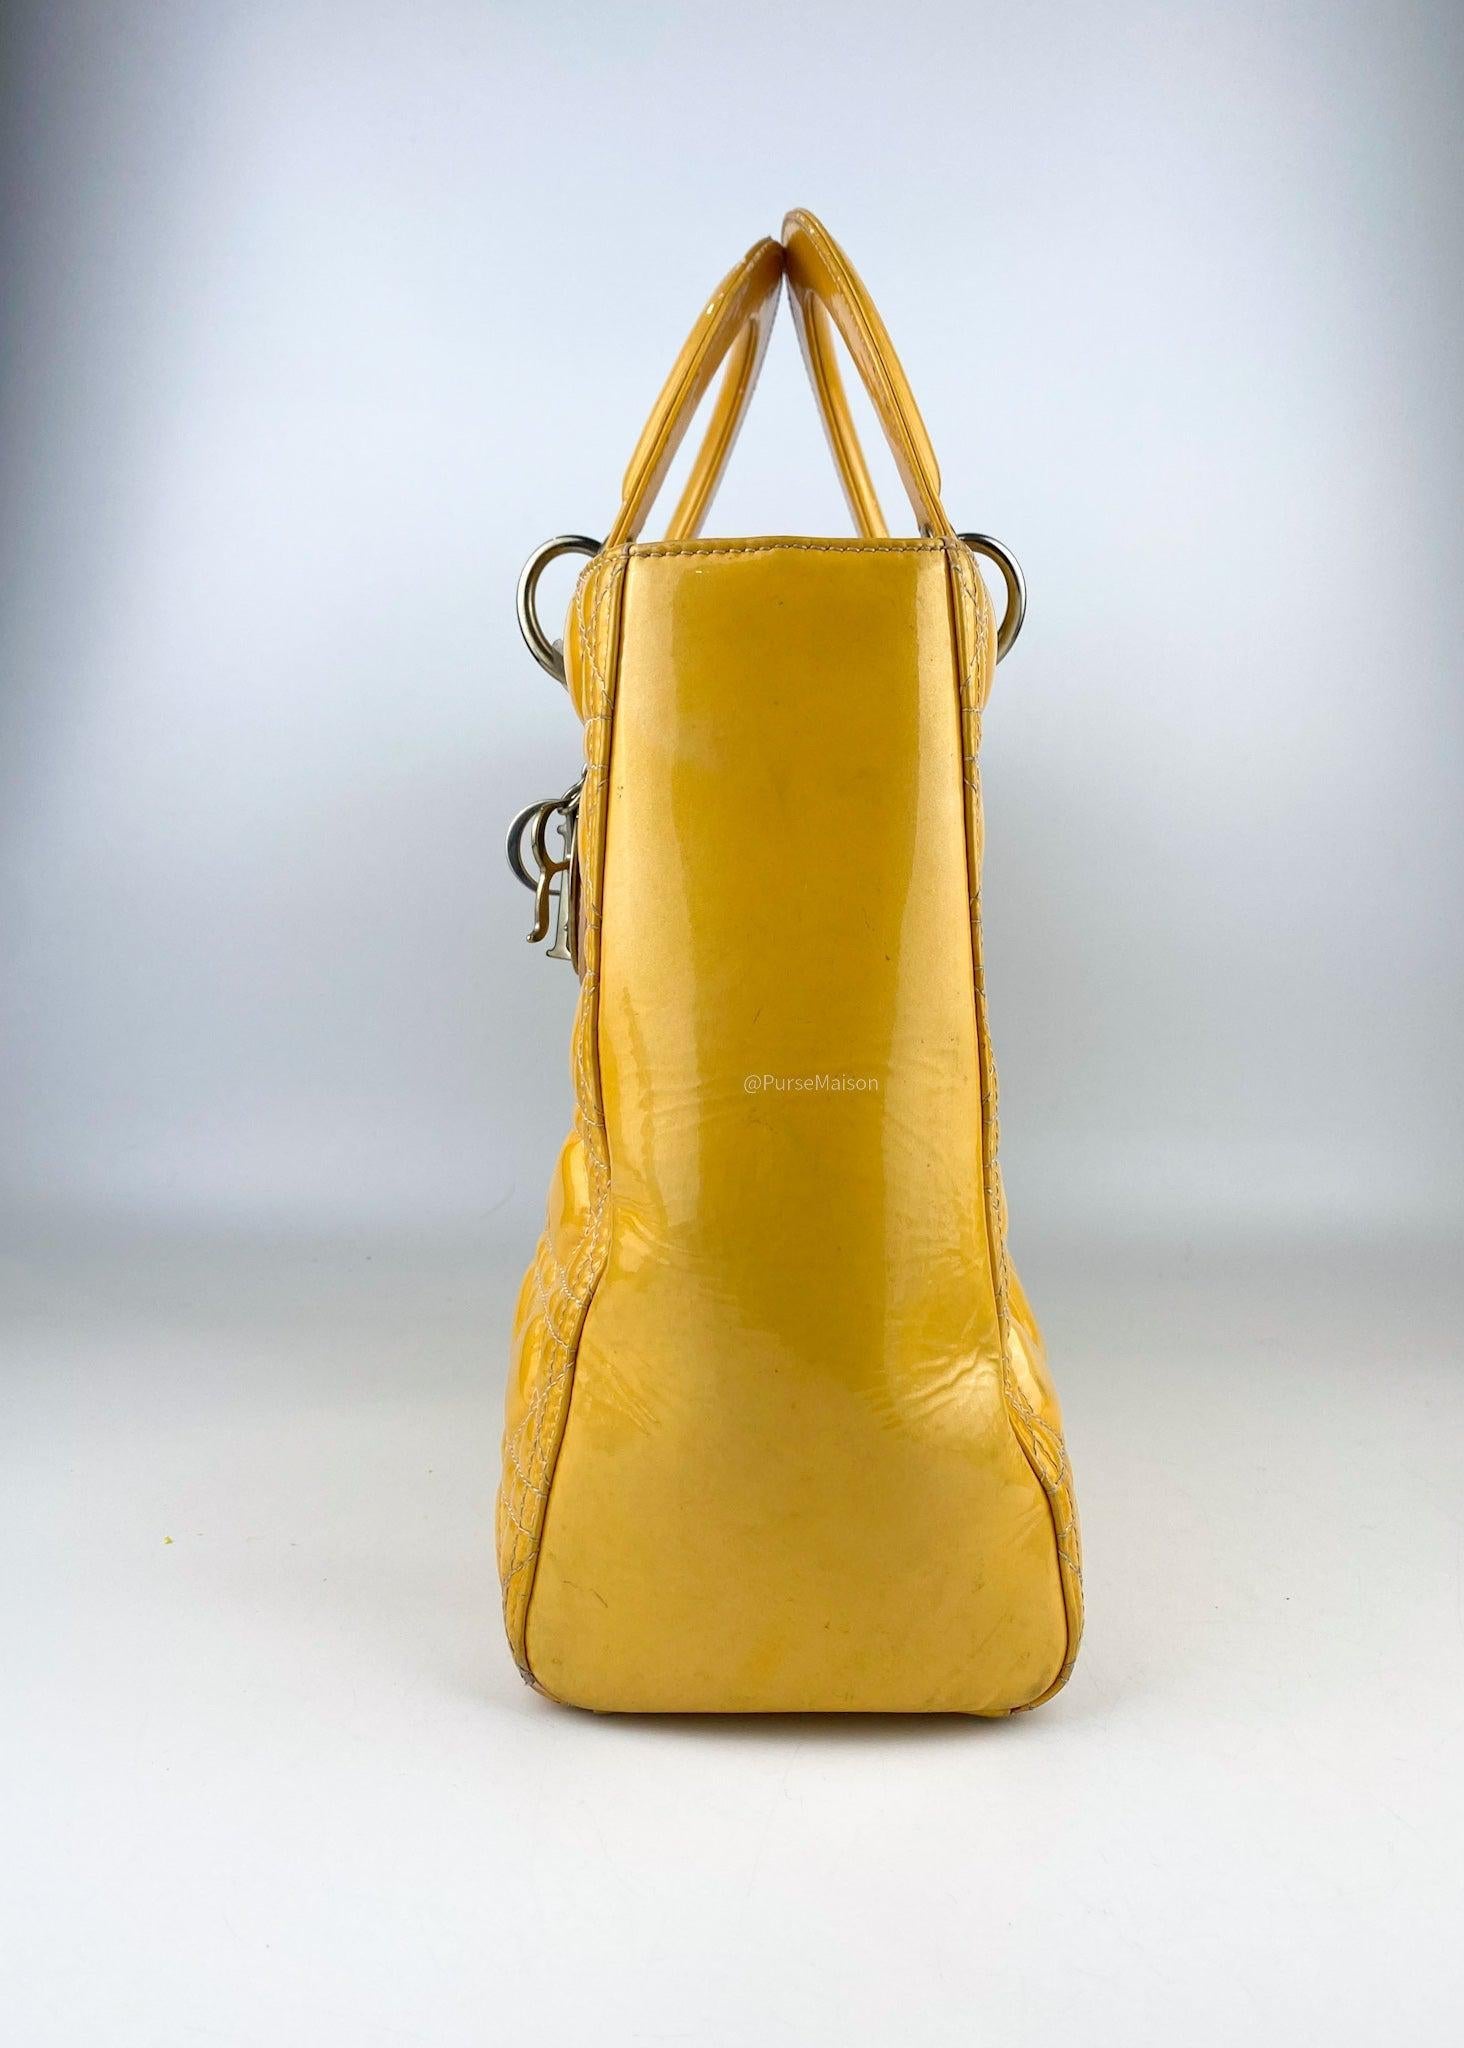 Christian Dior Lady Dior Large Yellow Patent Leather Bag